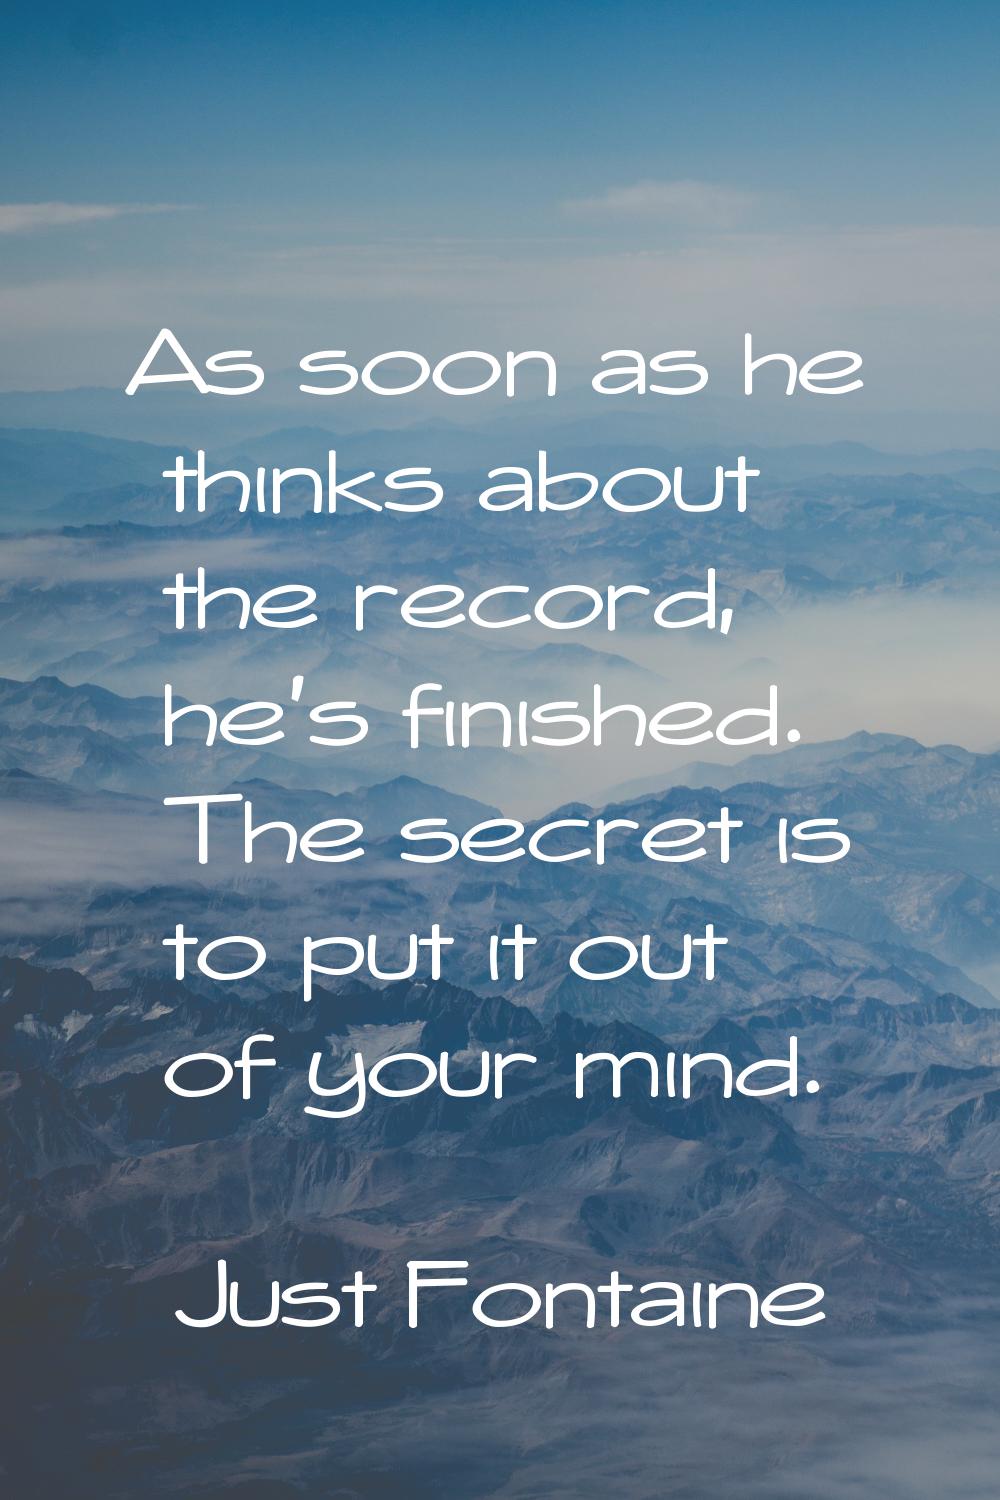 As soon as he thinks about the record, he's finished. The secret is to put it out of your mind.